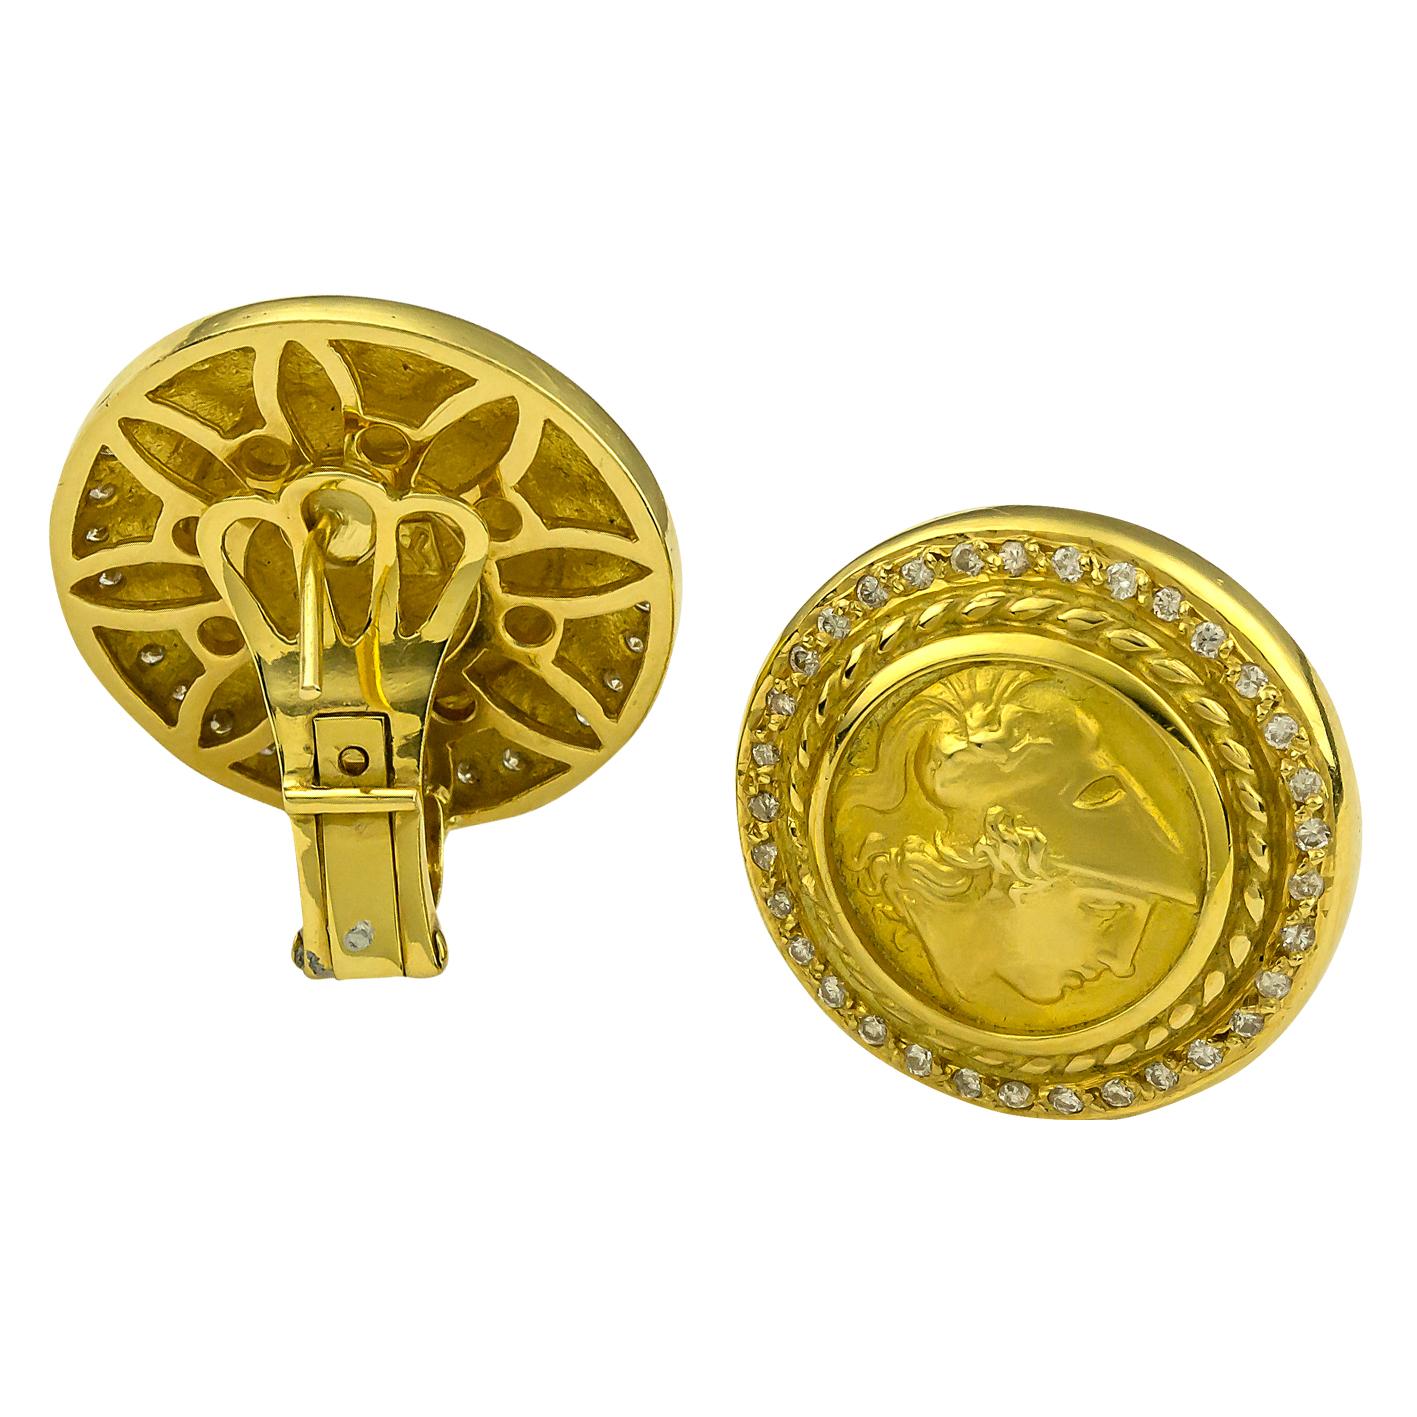 S.Georgios Designer Coin Earrings of Athina are Hand Made from 18 Karat Yellow Gold and feature a Coin of Athina the Goddess of Wisdom and the Protector of Athens. They are also decorated with Byzantine-style workmanship and have Brilliant cut